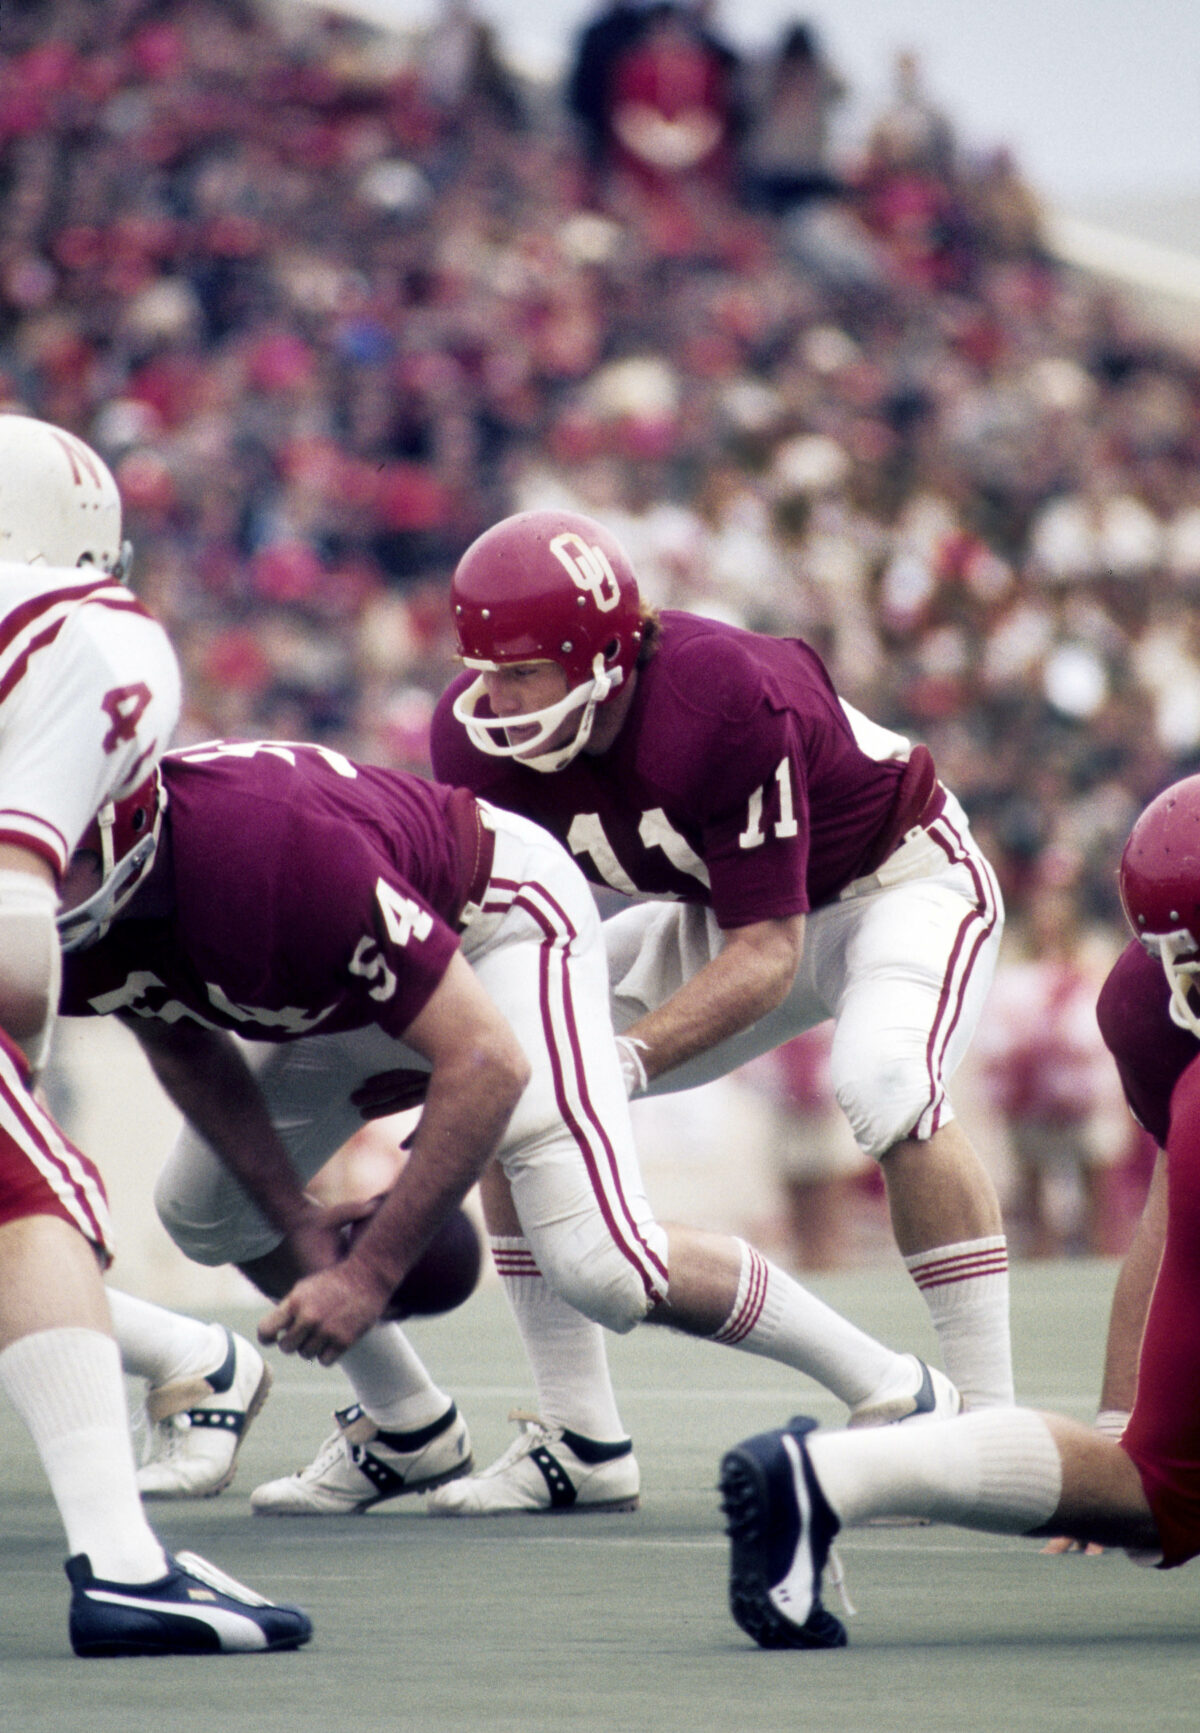 A look back at Oklahoma-Nebraska through the years in fantastic still images